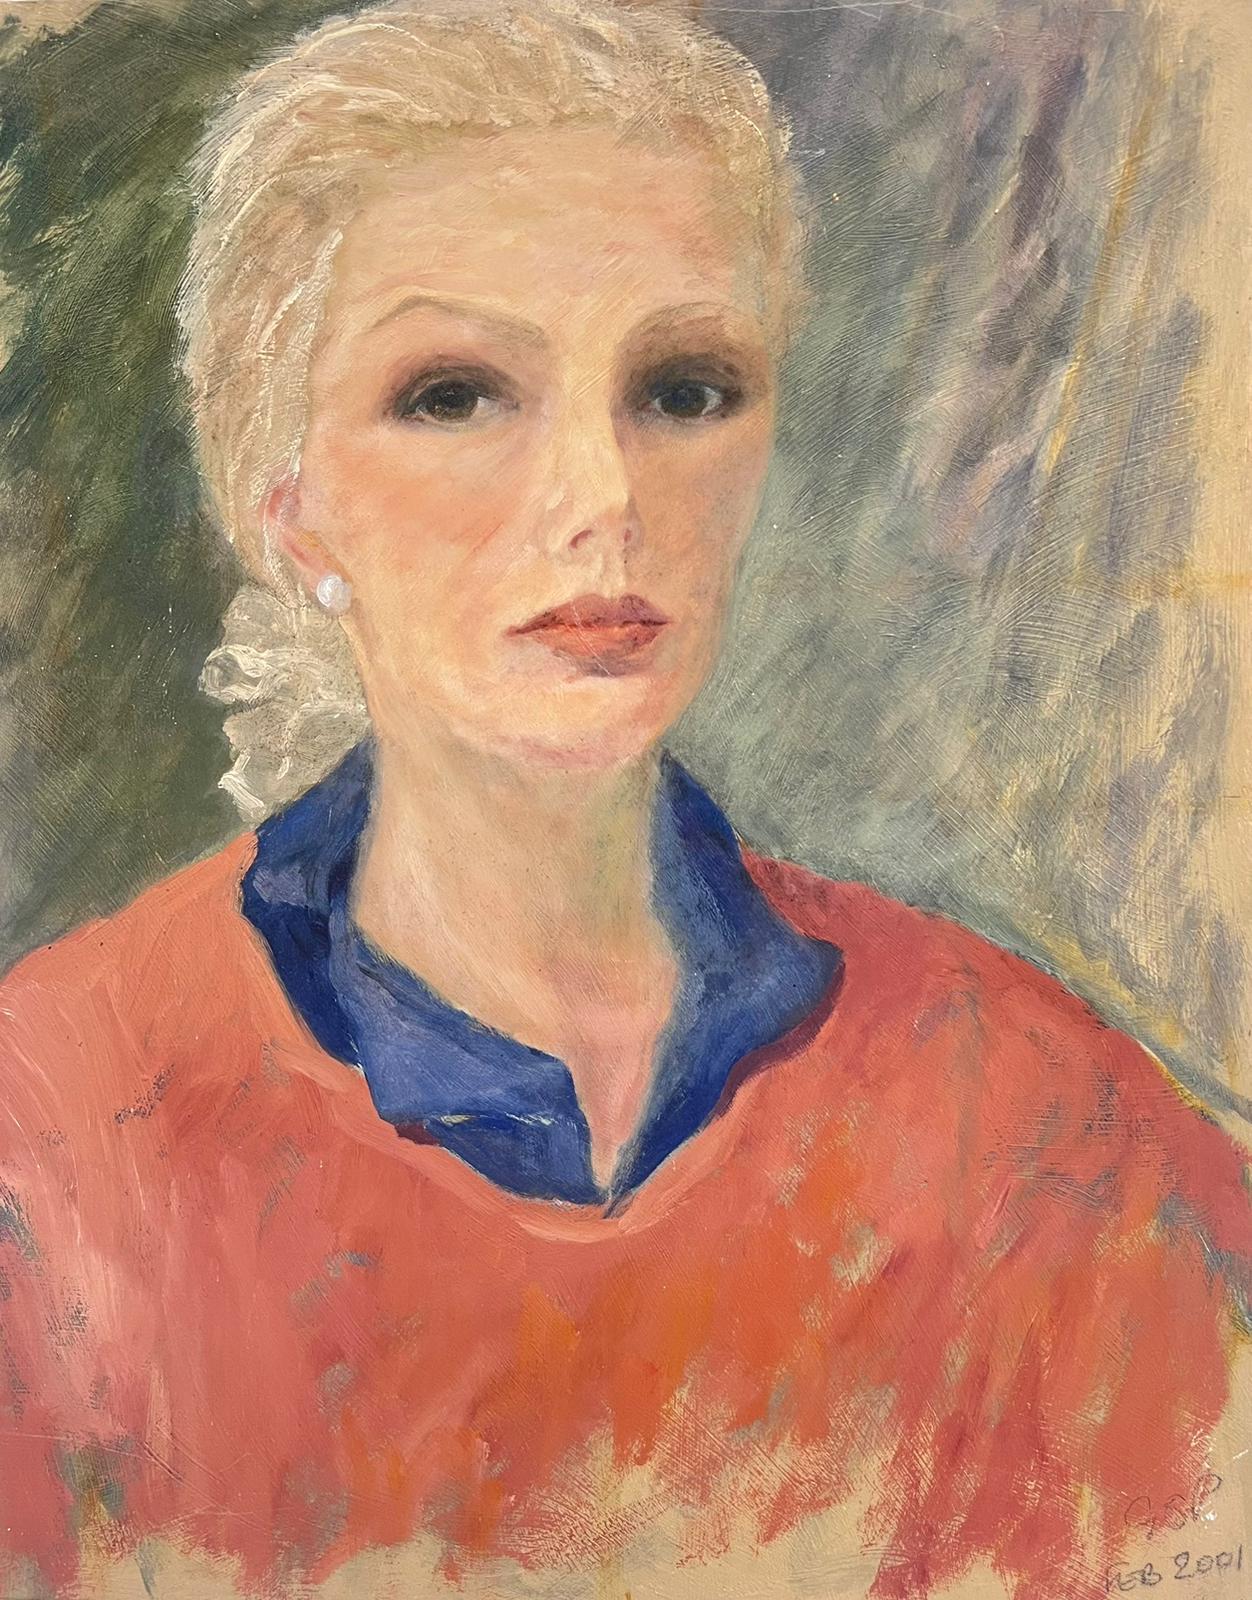 Portrait of a Lady
by Geza Somerset-Paddon (British contemporary)
signed oil on board, unframed
dated feb 2001
board: 20 x 16 inches
provenance: private collection, England
condition: good and sound condition